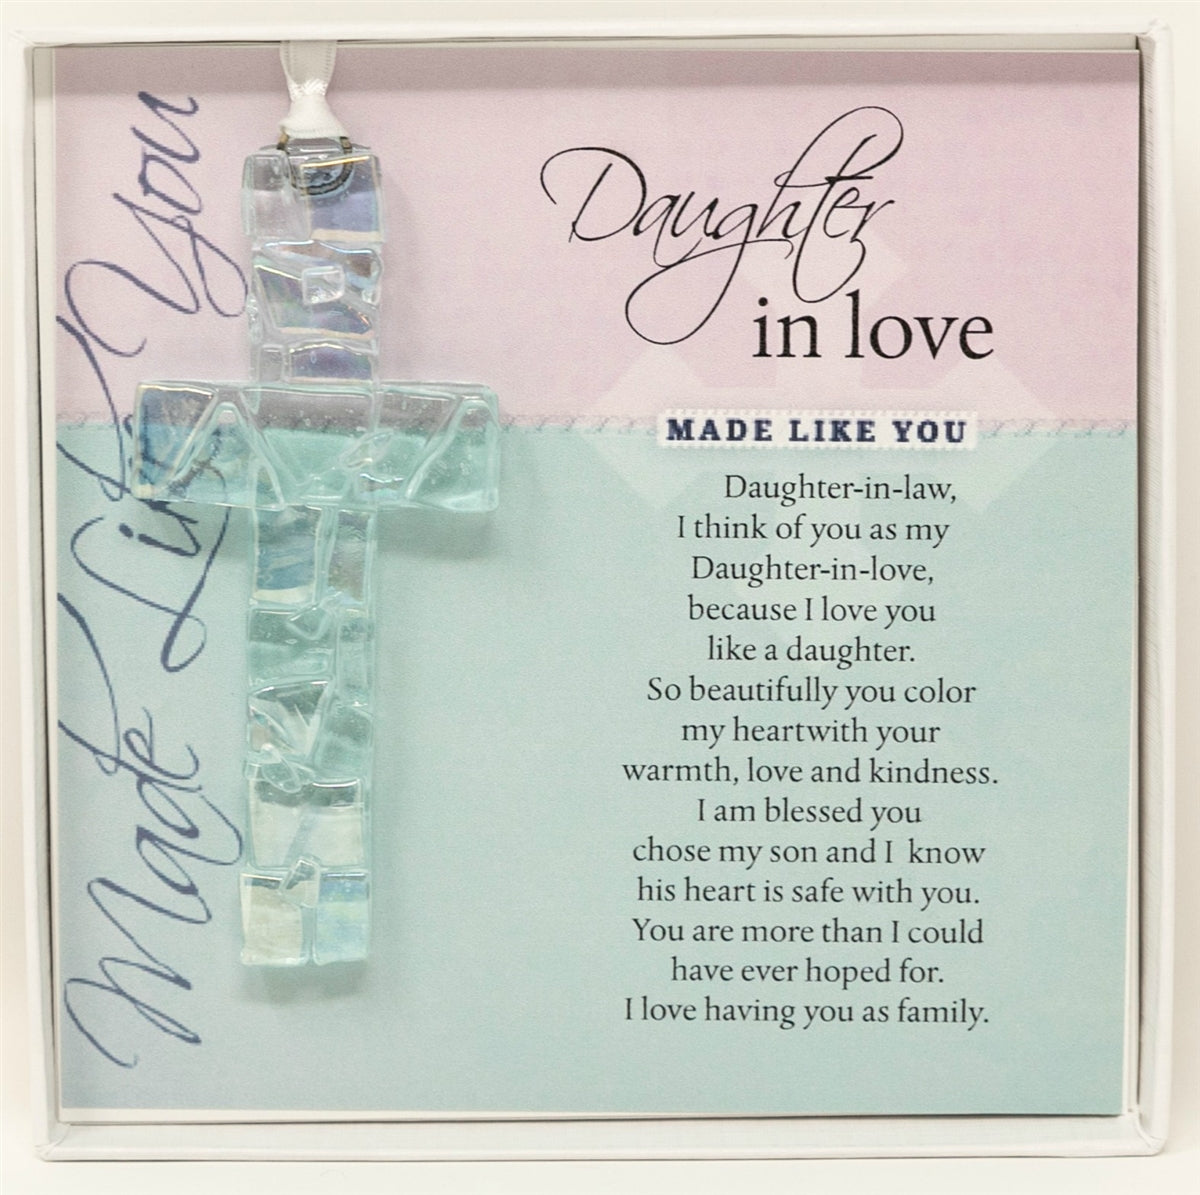 Daughter in Love Gift: Handmade clear mosaic cross with "Daughter in Love" sentiment; packaged in a white 5.5"x5.5" box with a clear lid.